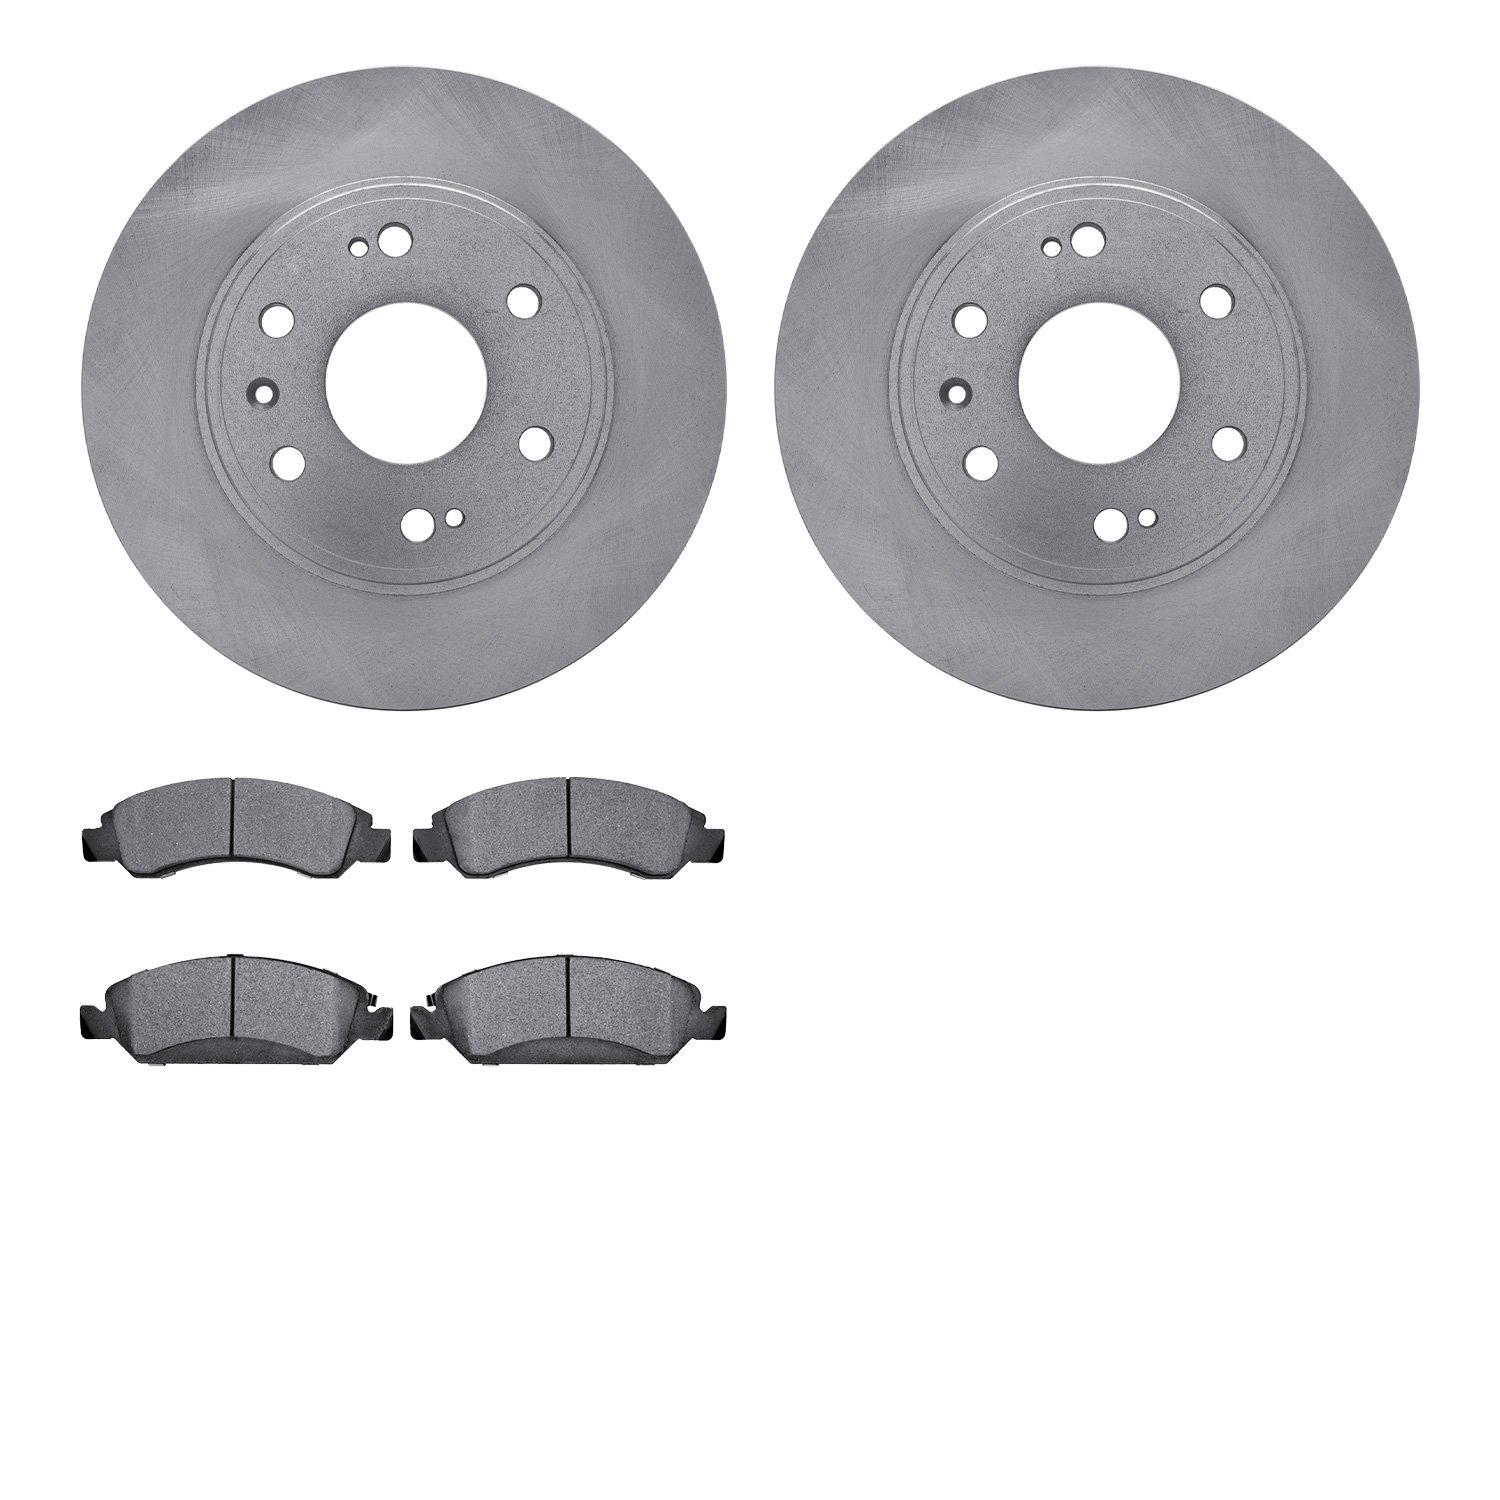 6402-48145 Brake Rotors with Ultimate-Duty Brake Pads, 2009-2020 GM, Position: Front